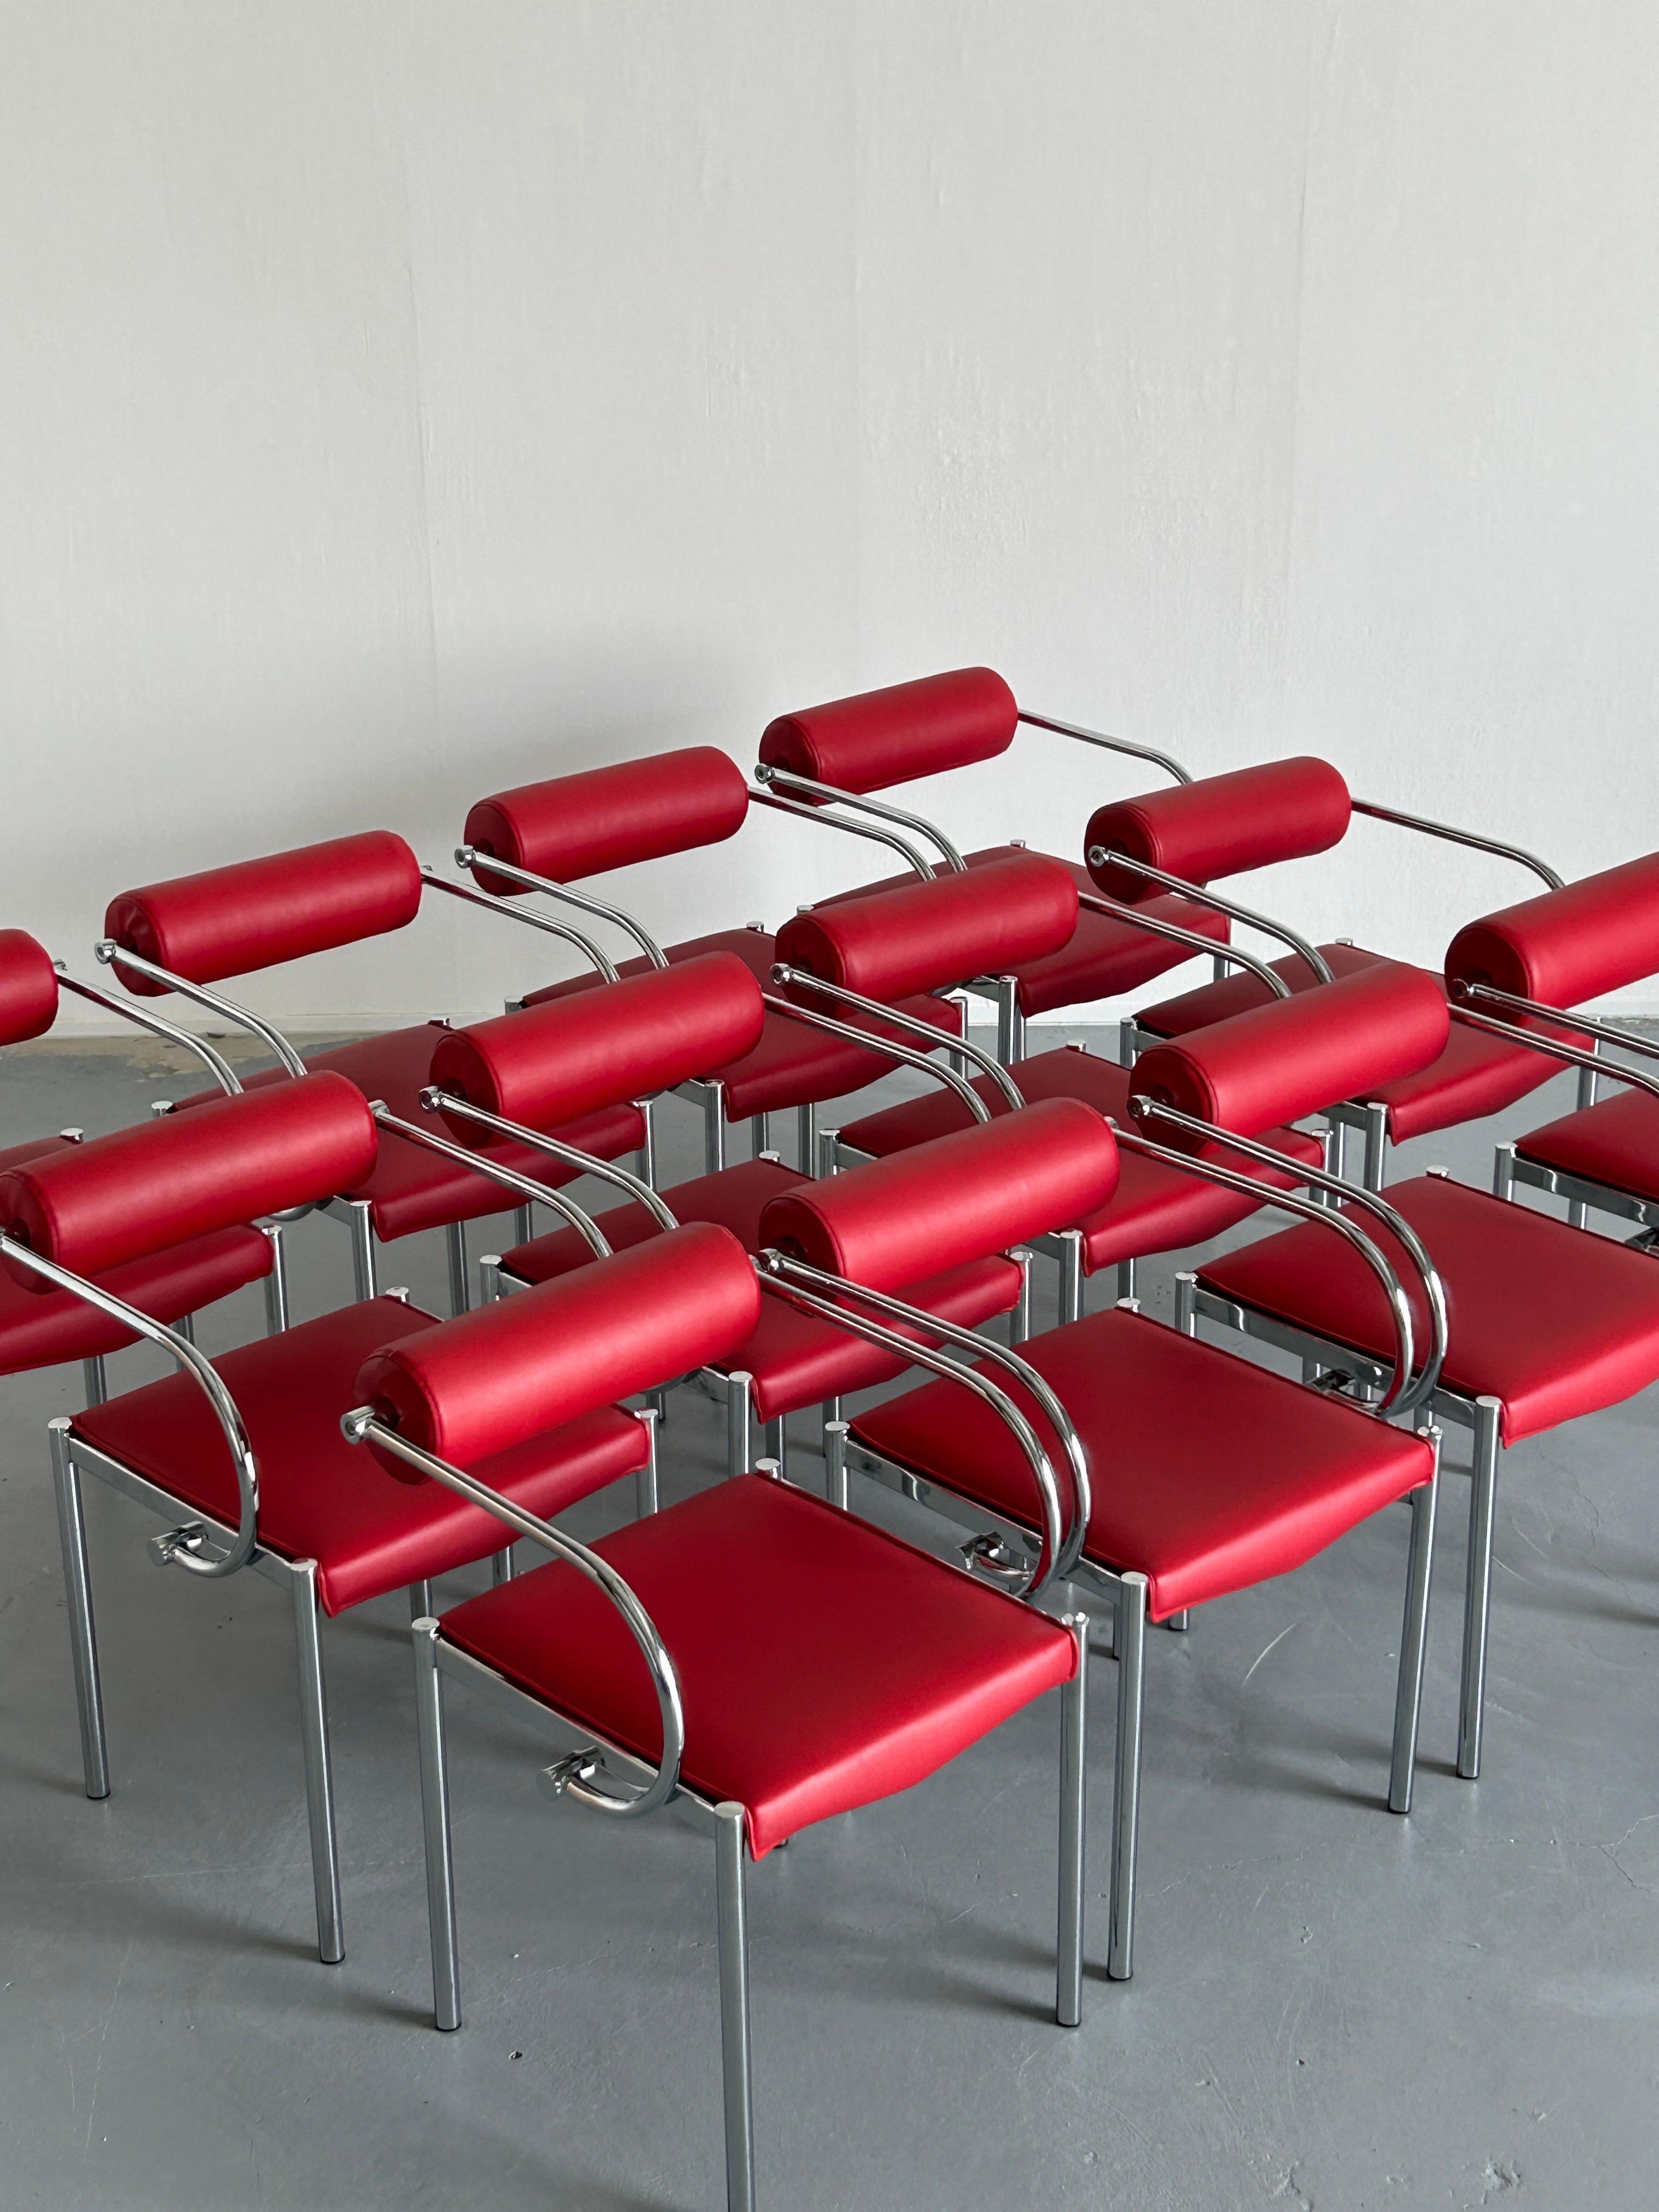 Metal Vintage Postmodern Tubular Chairs in the style of Arcadia Chairs by Paolo Piva